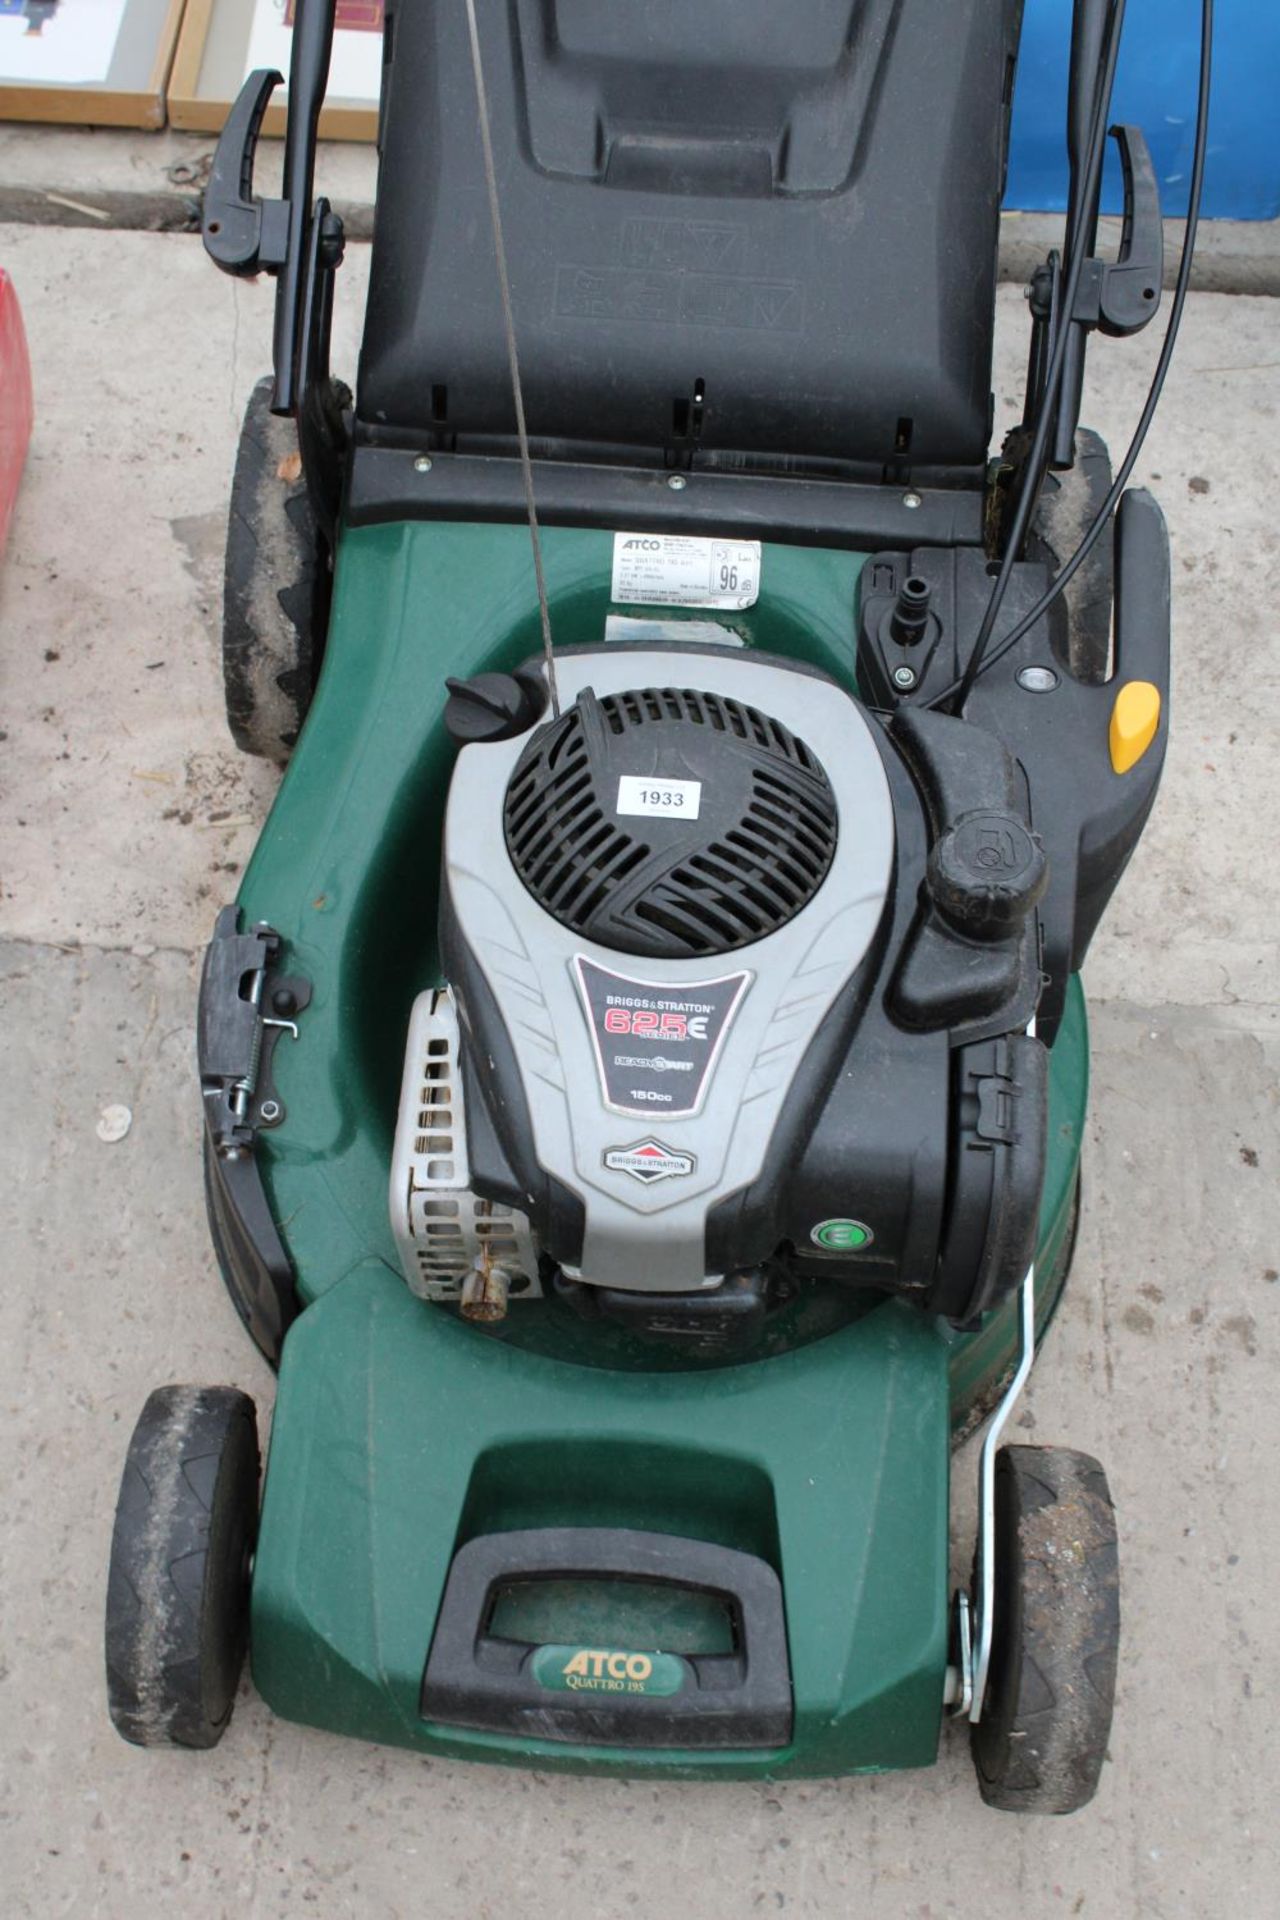 AN ATCO PETROL LAWN MOWER WITH GRASS BOX AND BRIGGS AND STRATTON ENGINE - Image 2 of 4